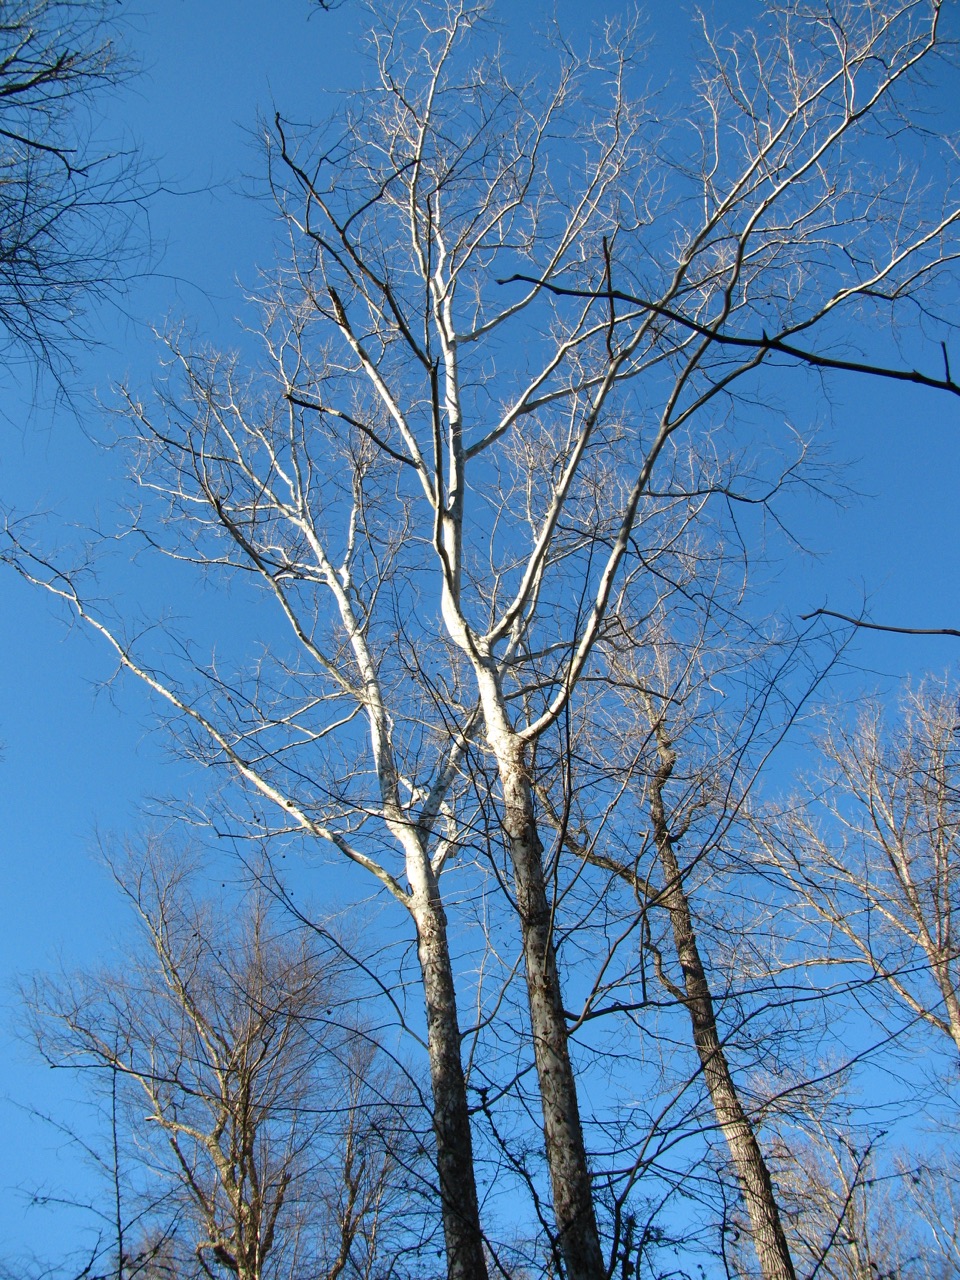 The Scientific Name is Platanus occidentalis. You will likely hear them called American Sycamore. This picture shows the Characteristic white inner bark on upper branches of Platanus occidentalis